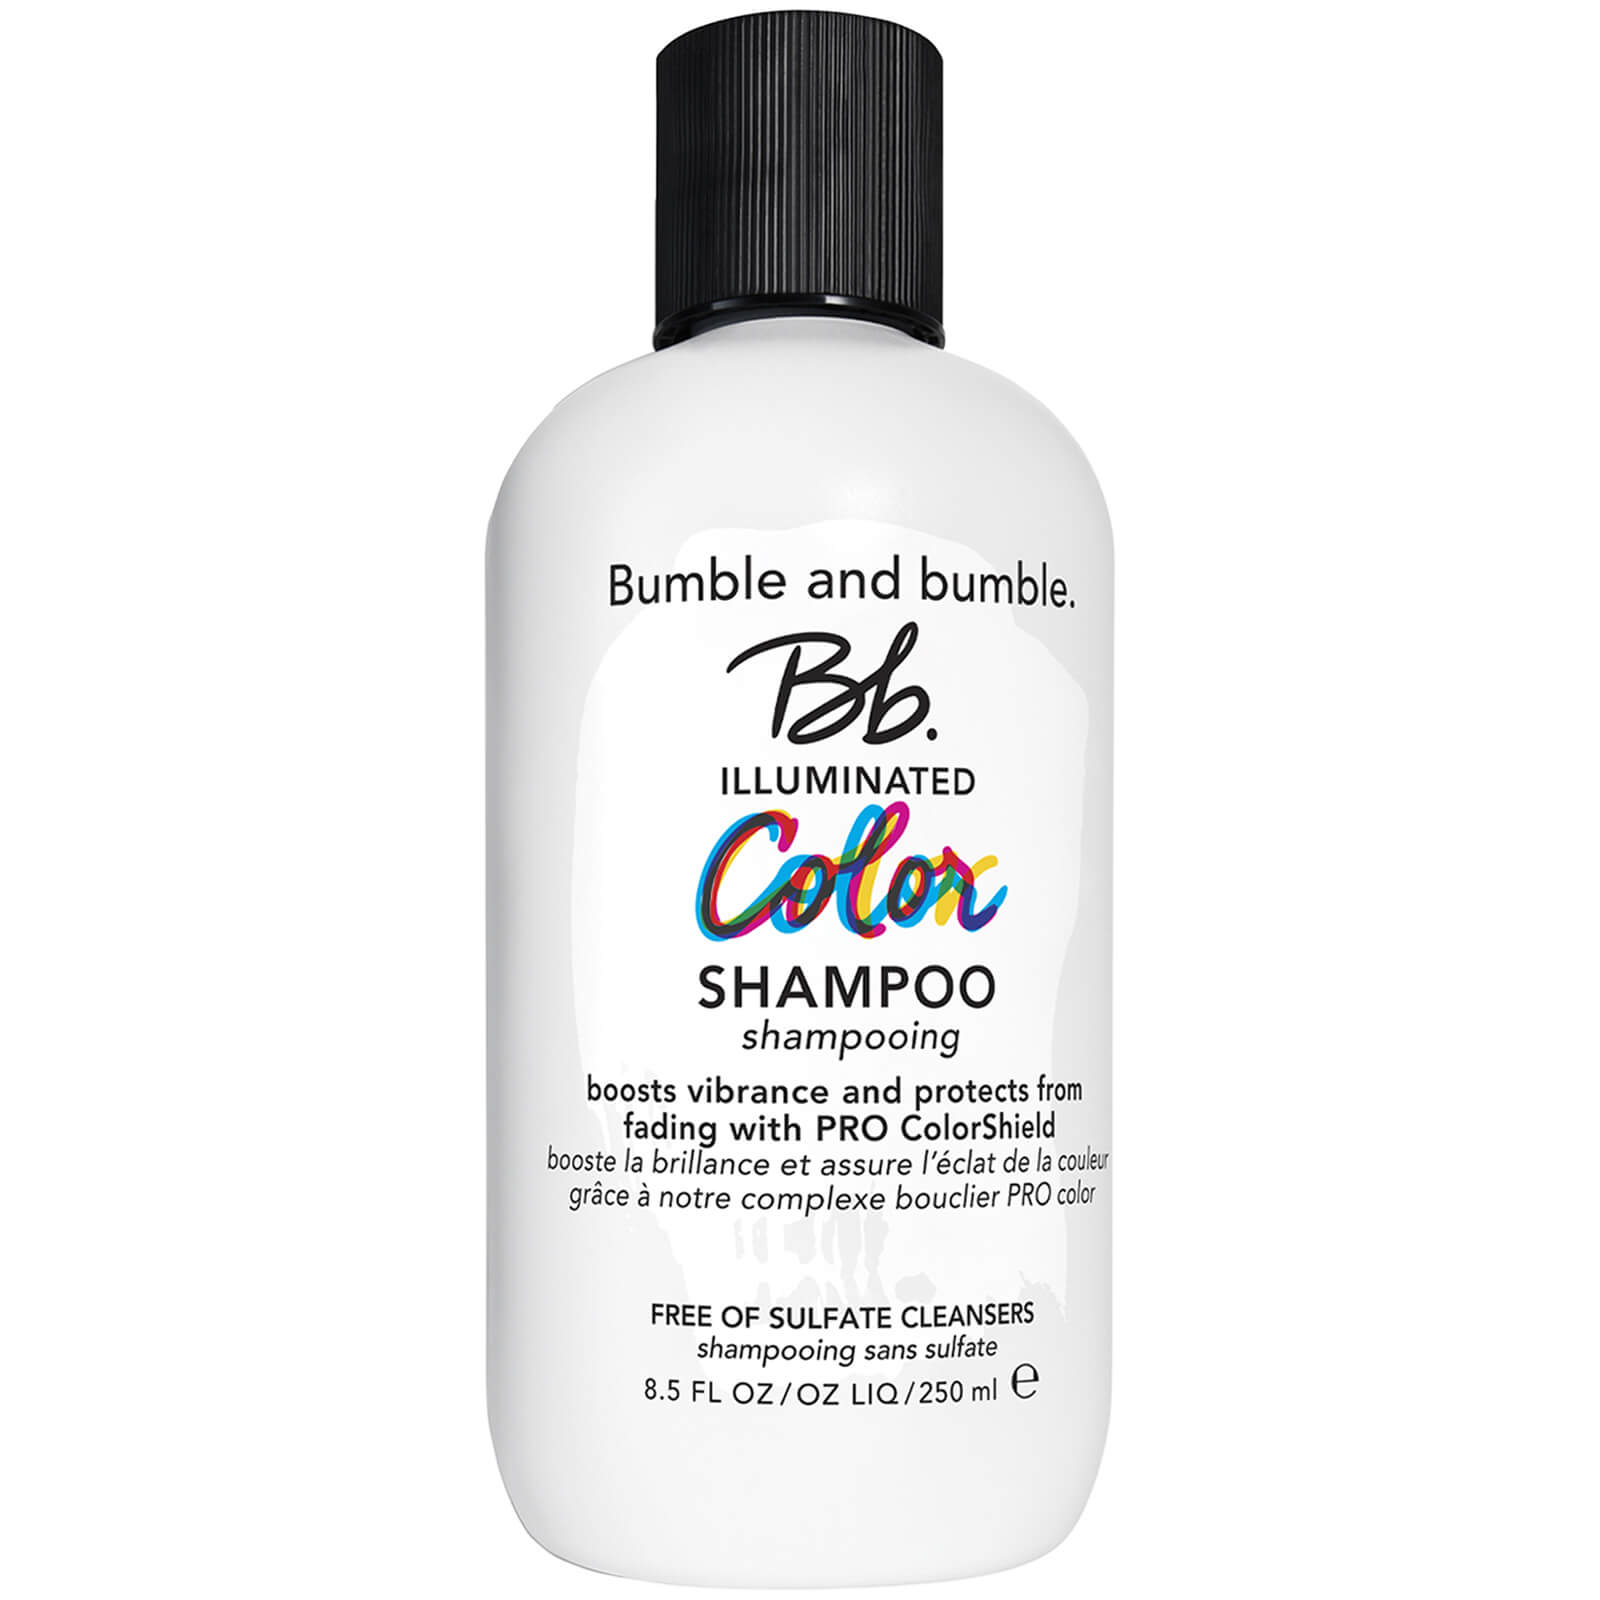 Photos - Hair Product Bumble and bumble. Bumble and bumble Illuminated Color Full Size Shampoo 250ml BY36010000 